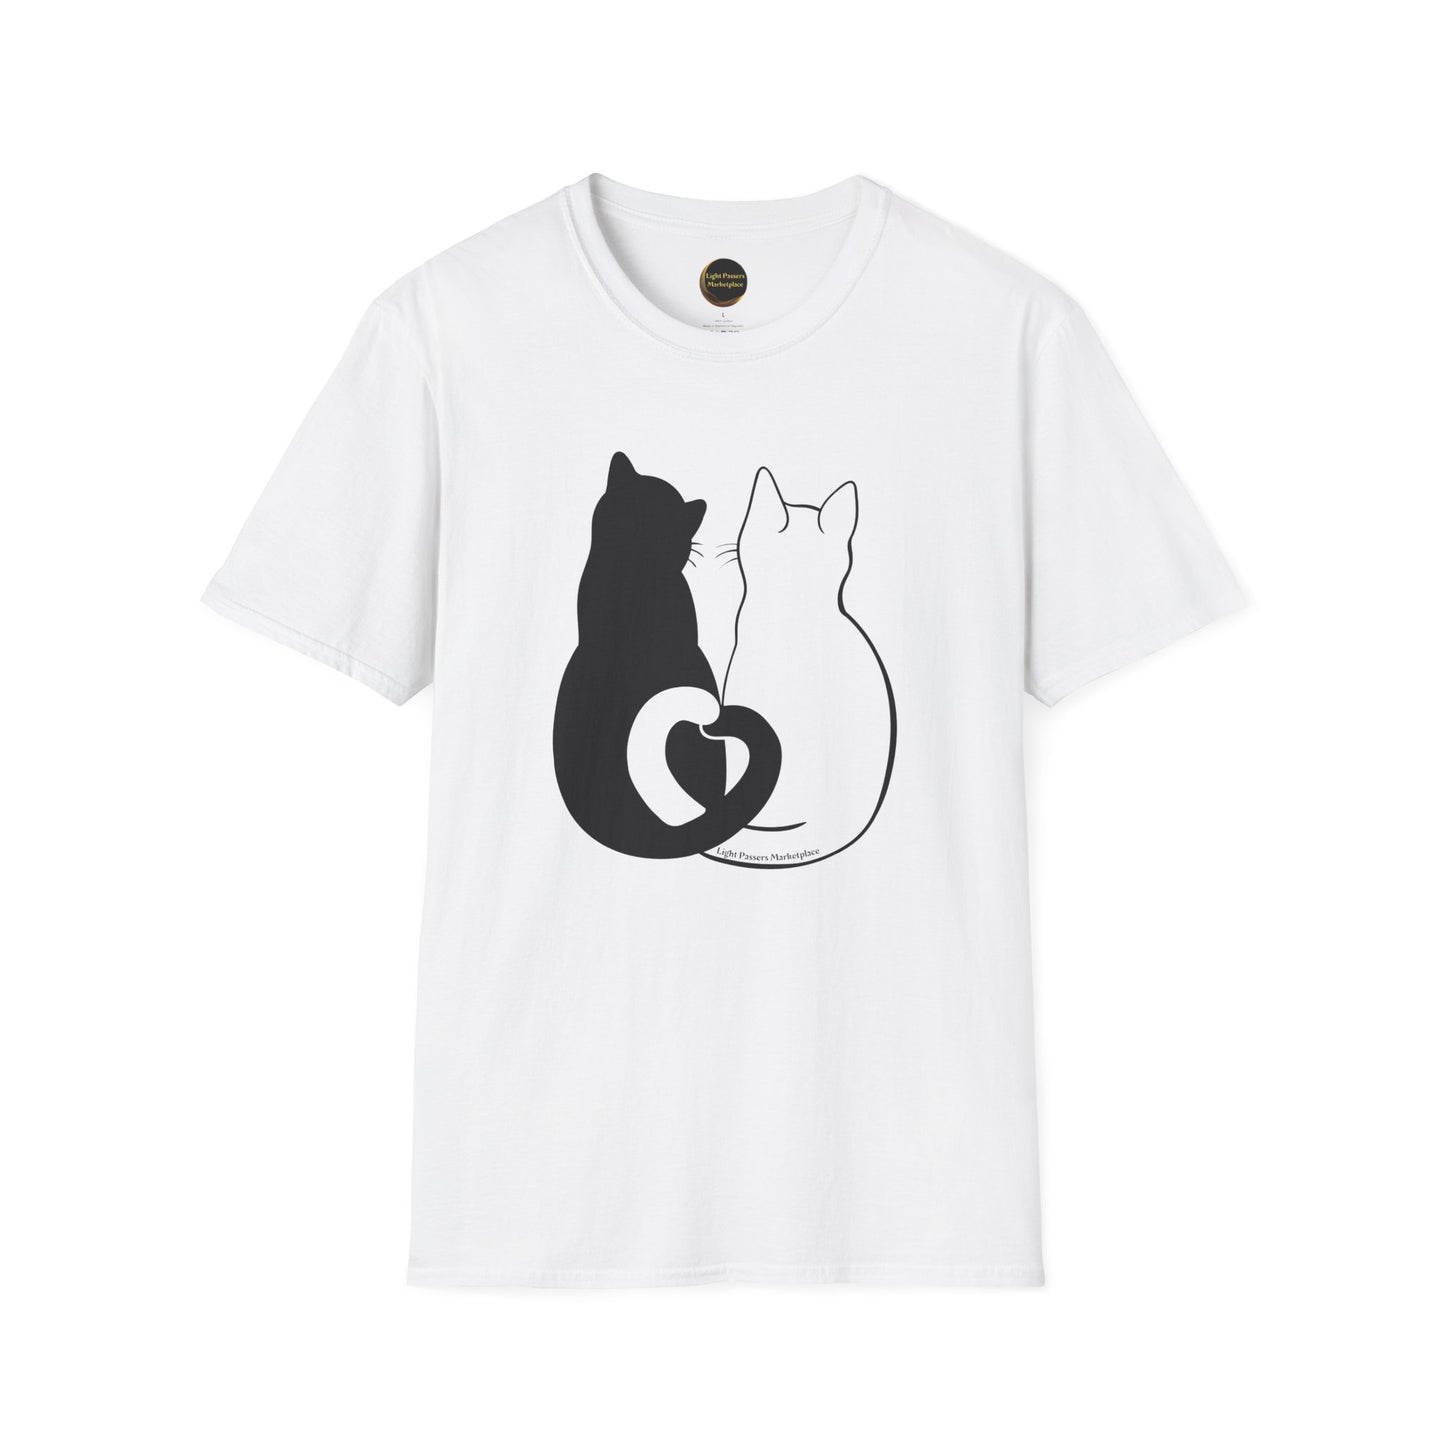 Light Passers Marketplace Cats in Love Unisex Adult Soft T-Shirt Simple Messages